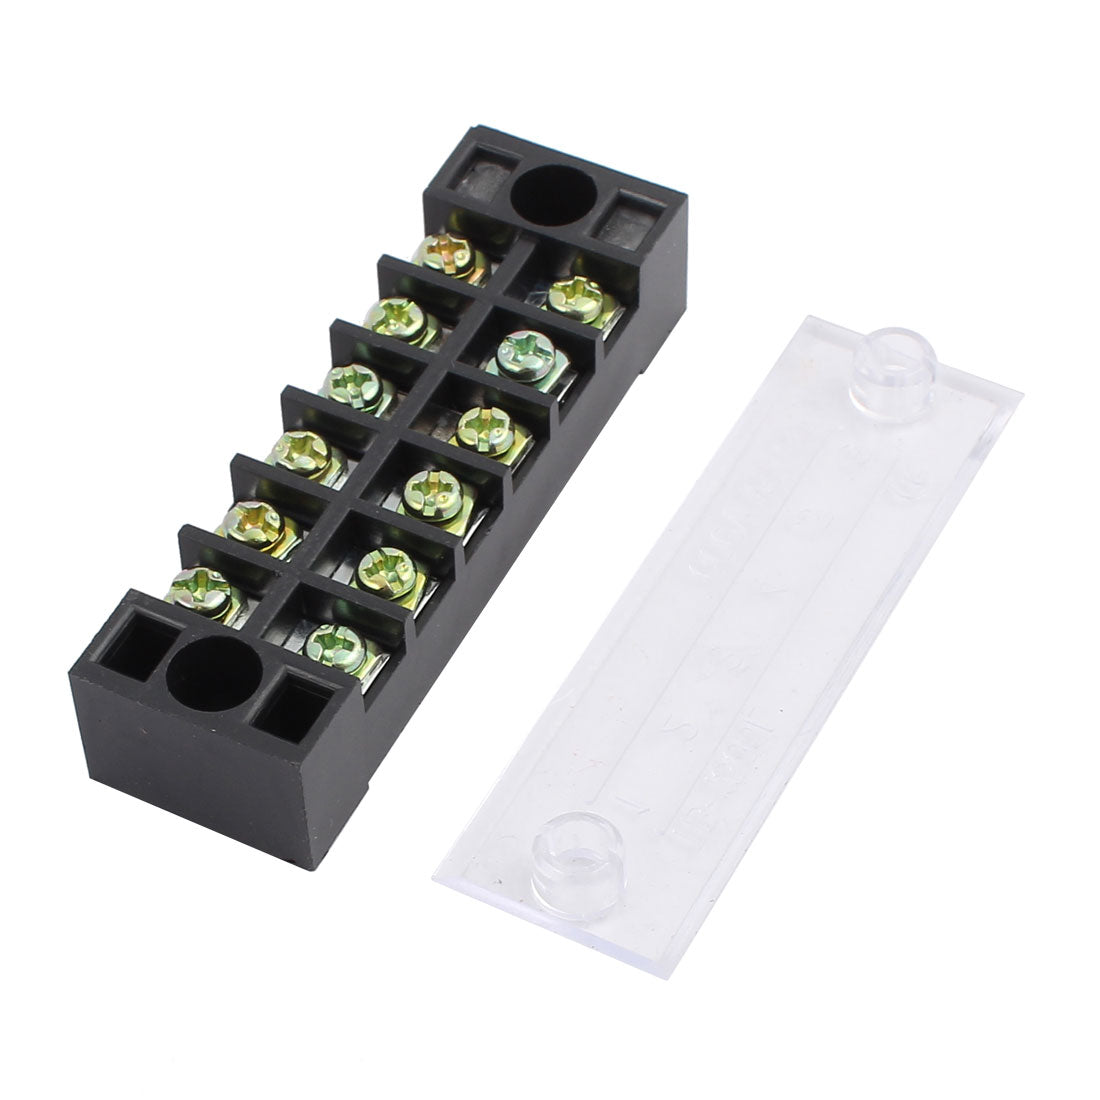 uxcell Uxcell 5Pcs 600V 15A 6 Positions 6P Dual Rows Covered Barrier Screw Terminal Blocks